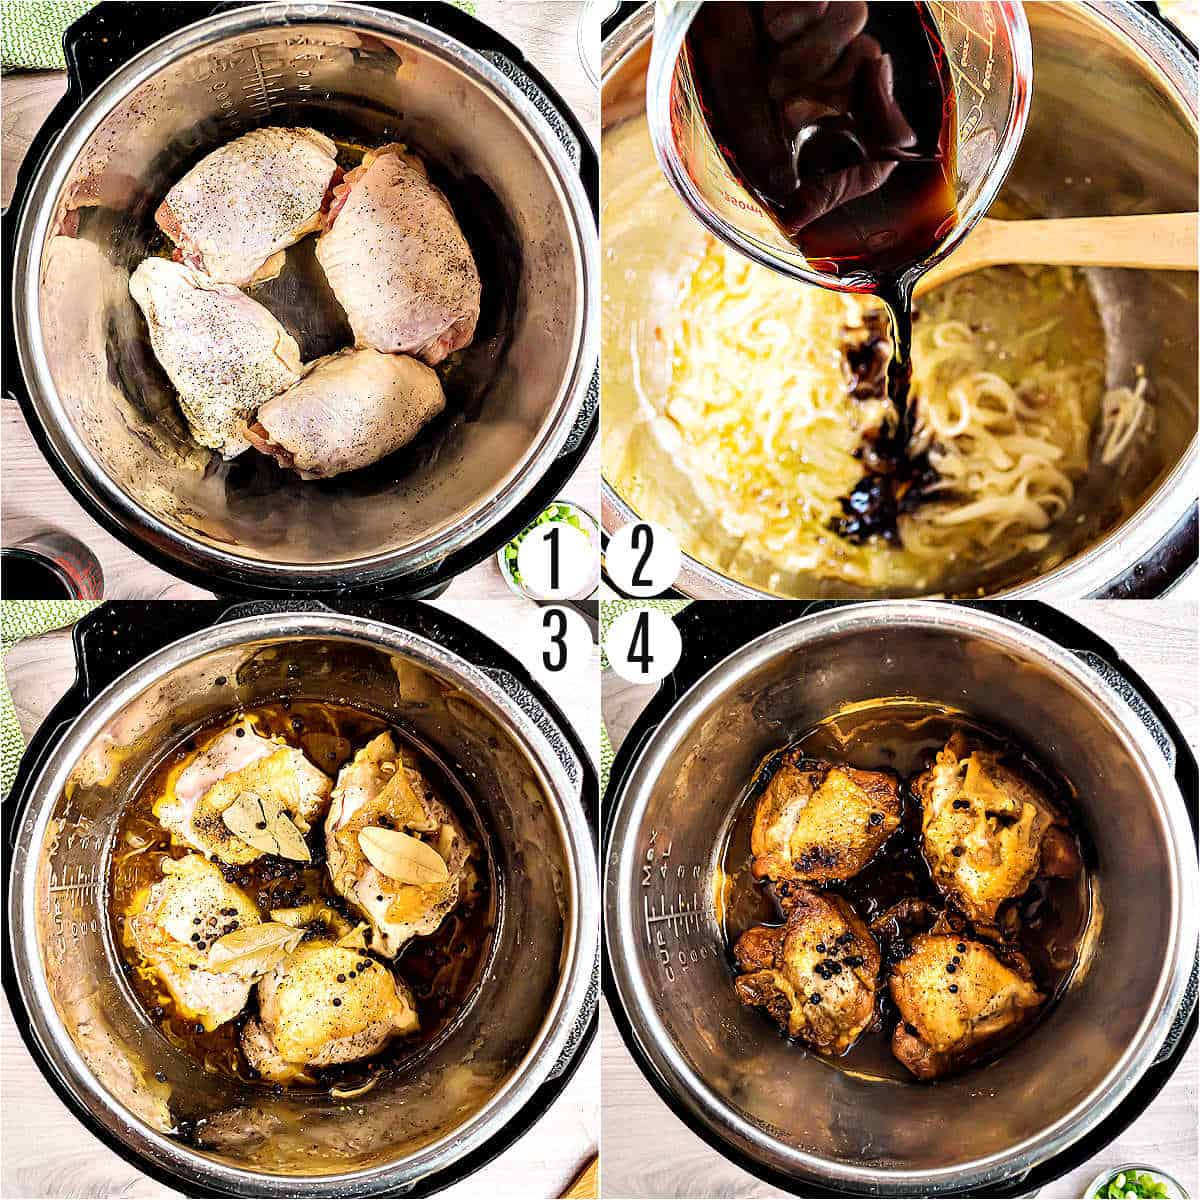 Step by step photos showing how to make instant pot chicken adobo.